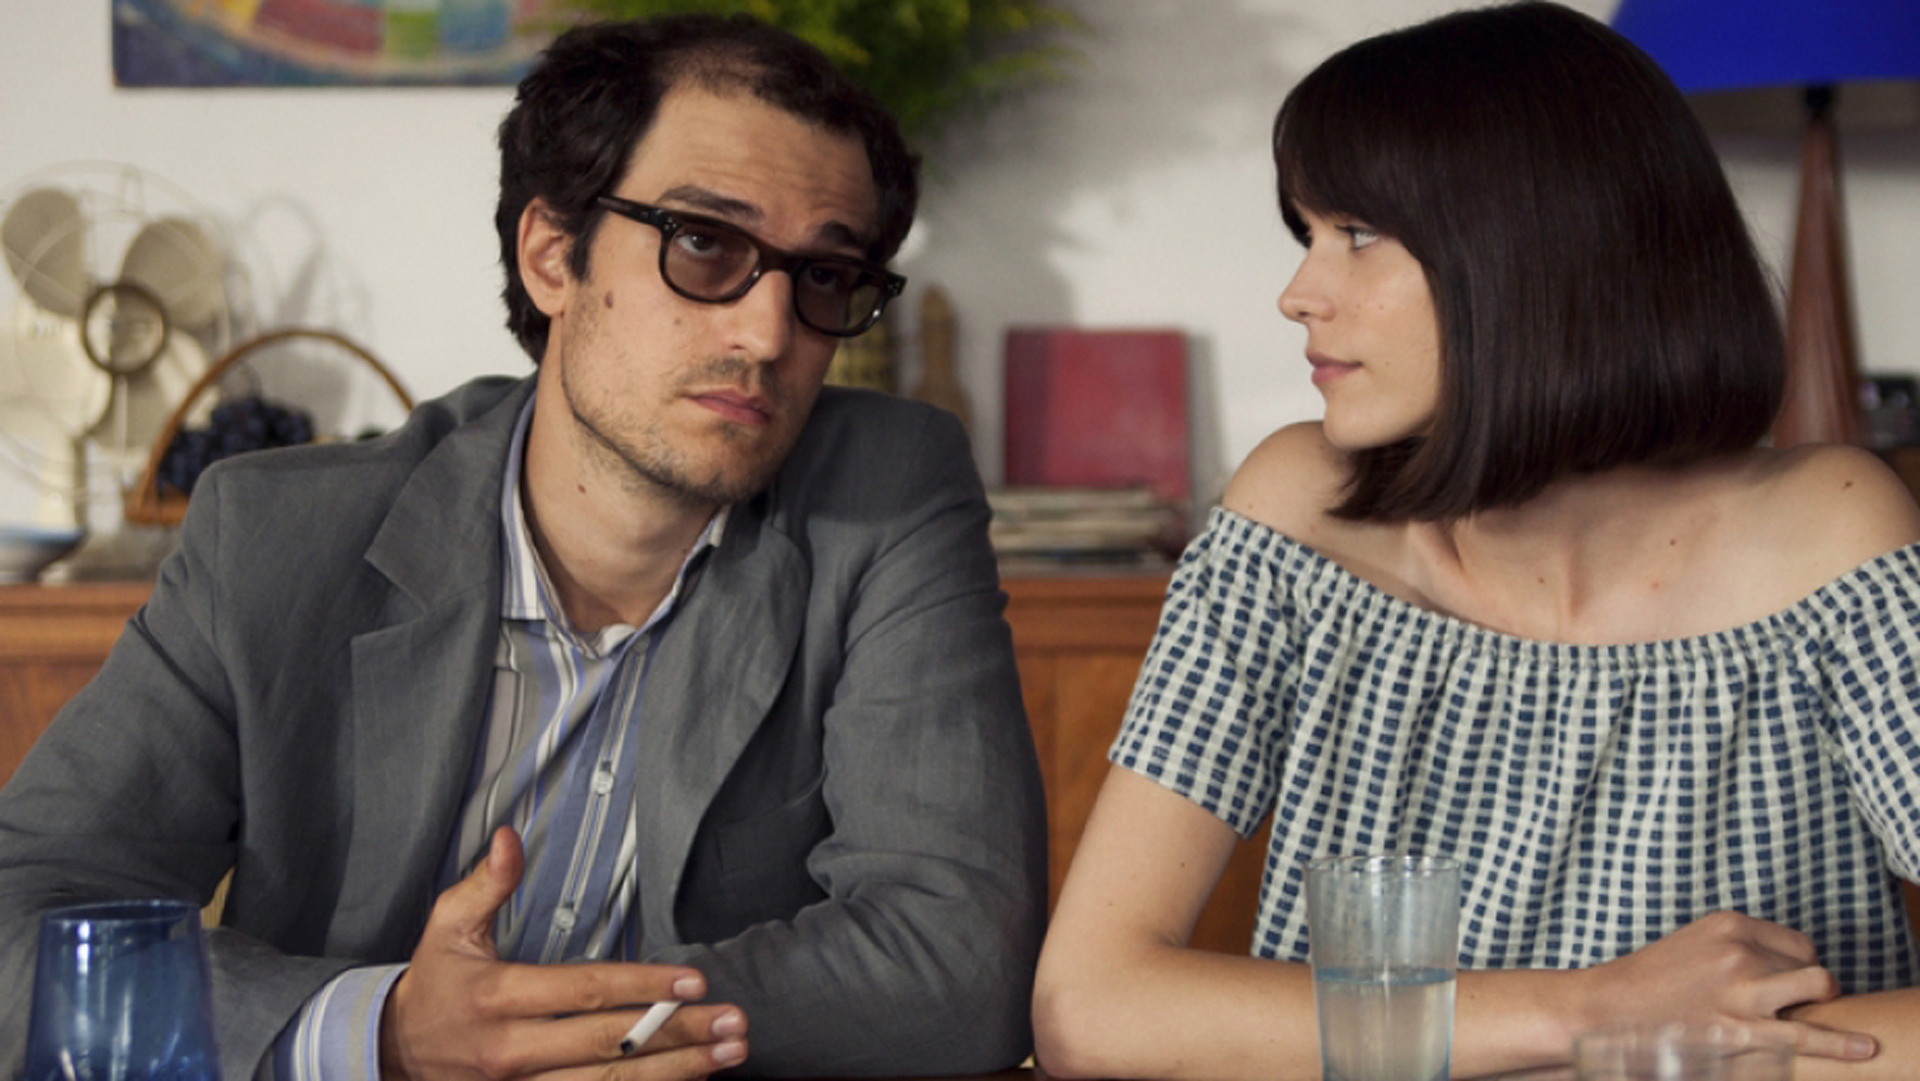 Jean-Luc Godard: Box Office and Awards Don't Create Cinematic Legacy